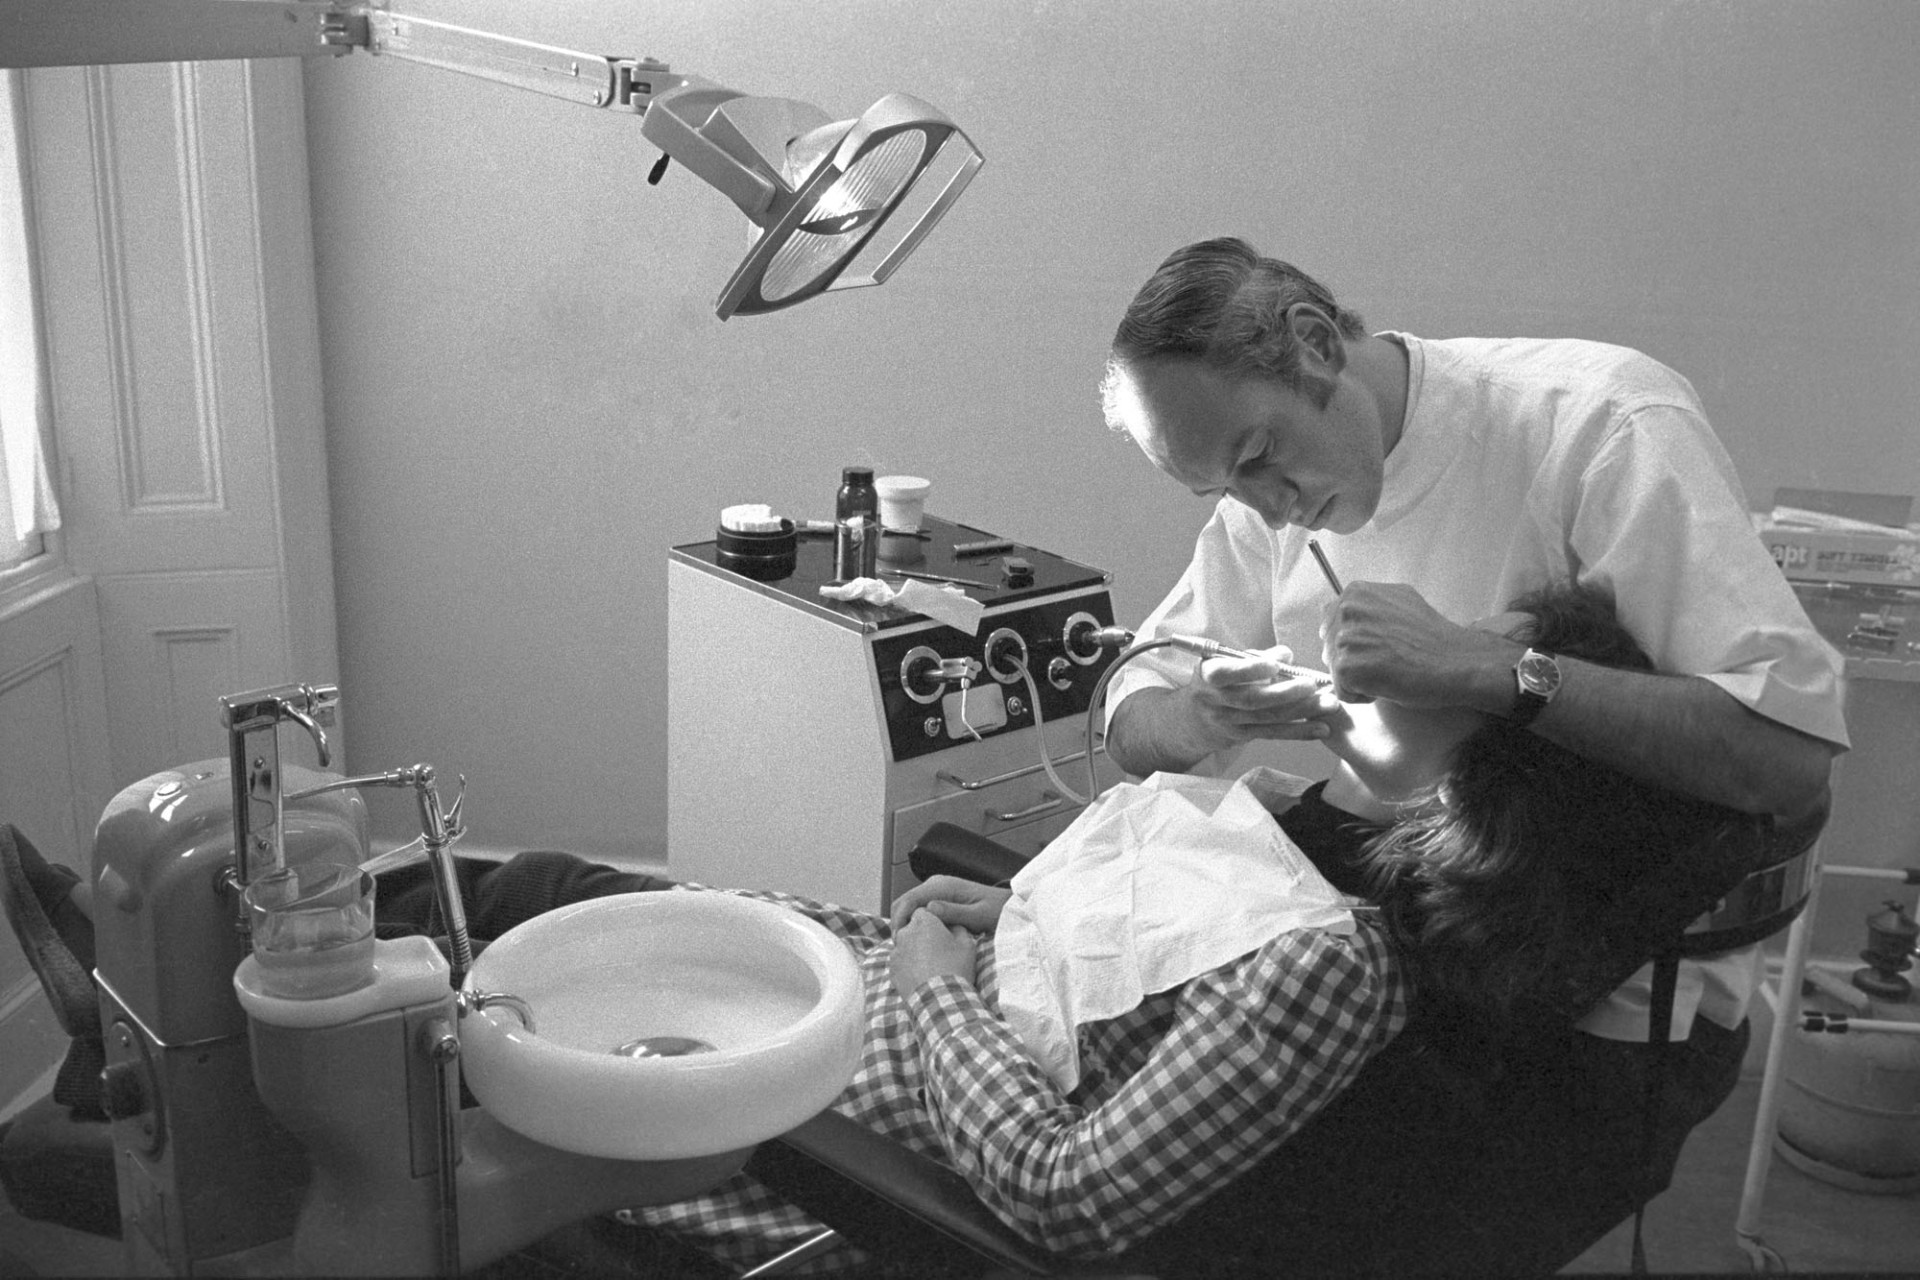 Dentist and assistant treating woman (my wife!)
[Mr Rollinson, dentist, treating Robin Ravilious in his dentist surgery at Halsdon terrace, Torrington.]